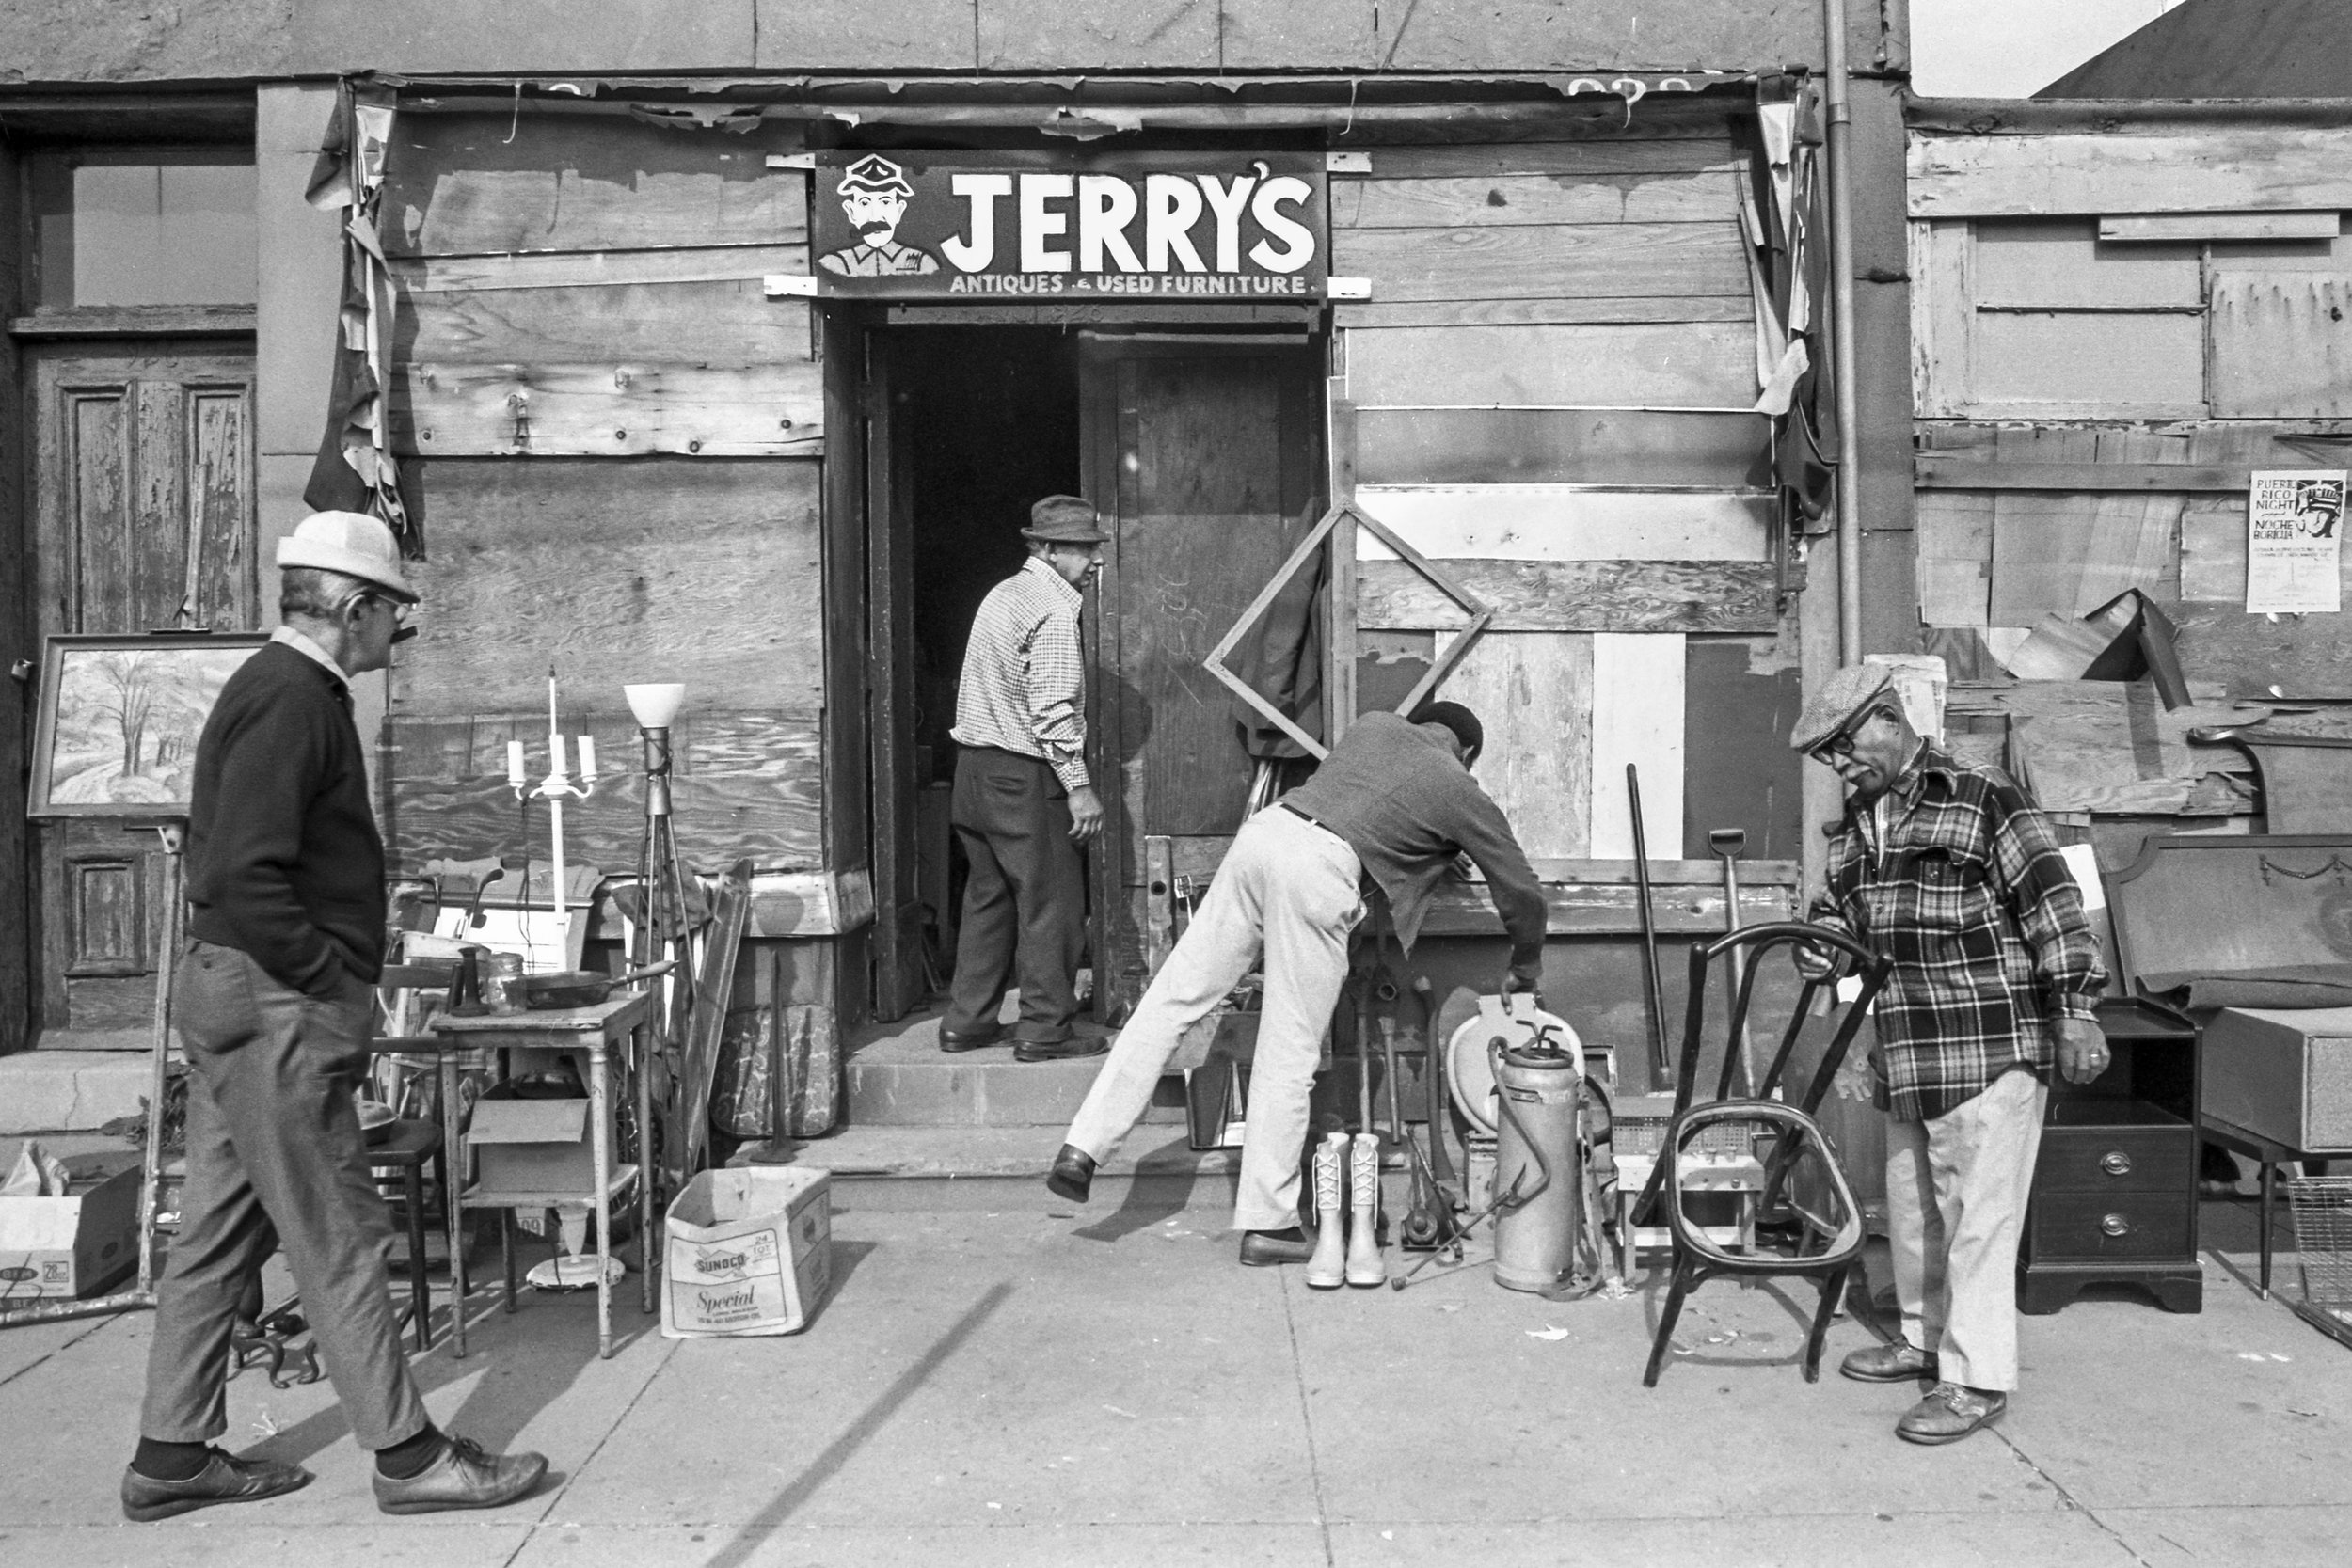  Jerry’s Antiques at 928 State Street in 1978. The New Haven Preservation Trust occupies this space today. 